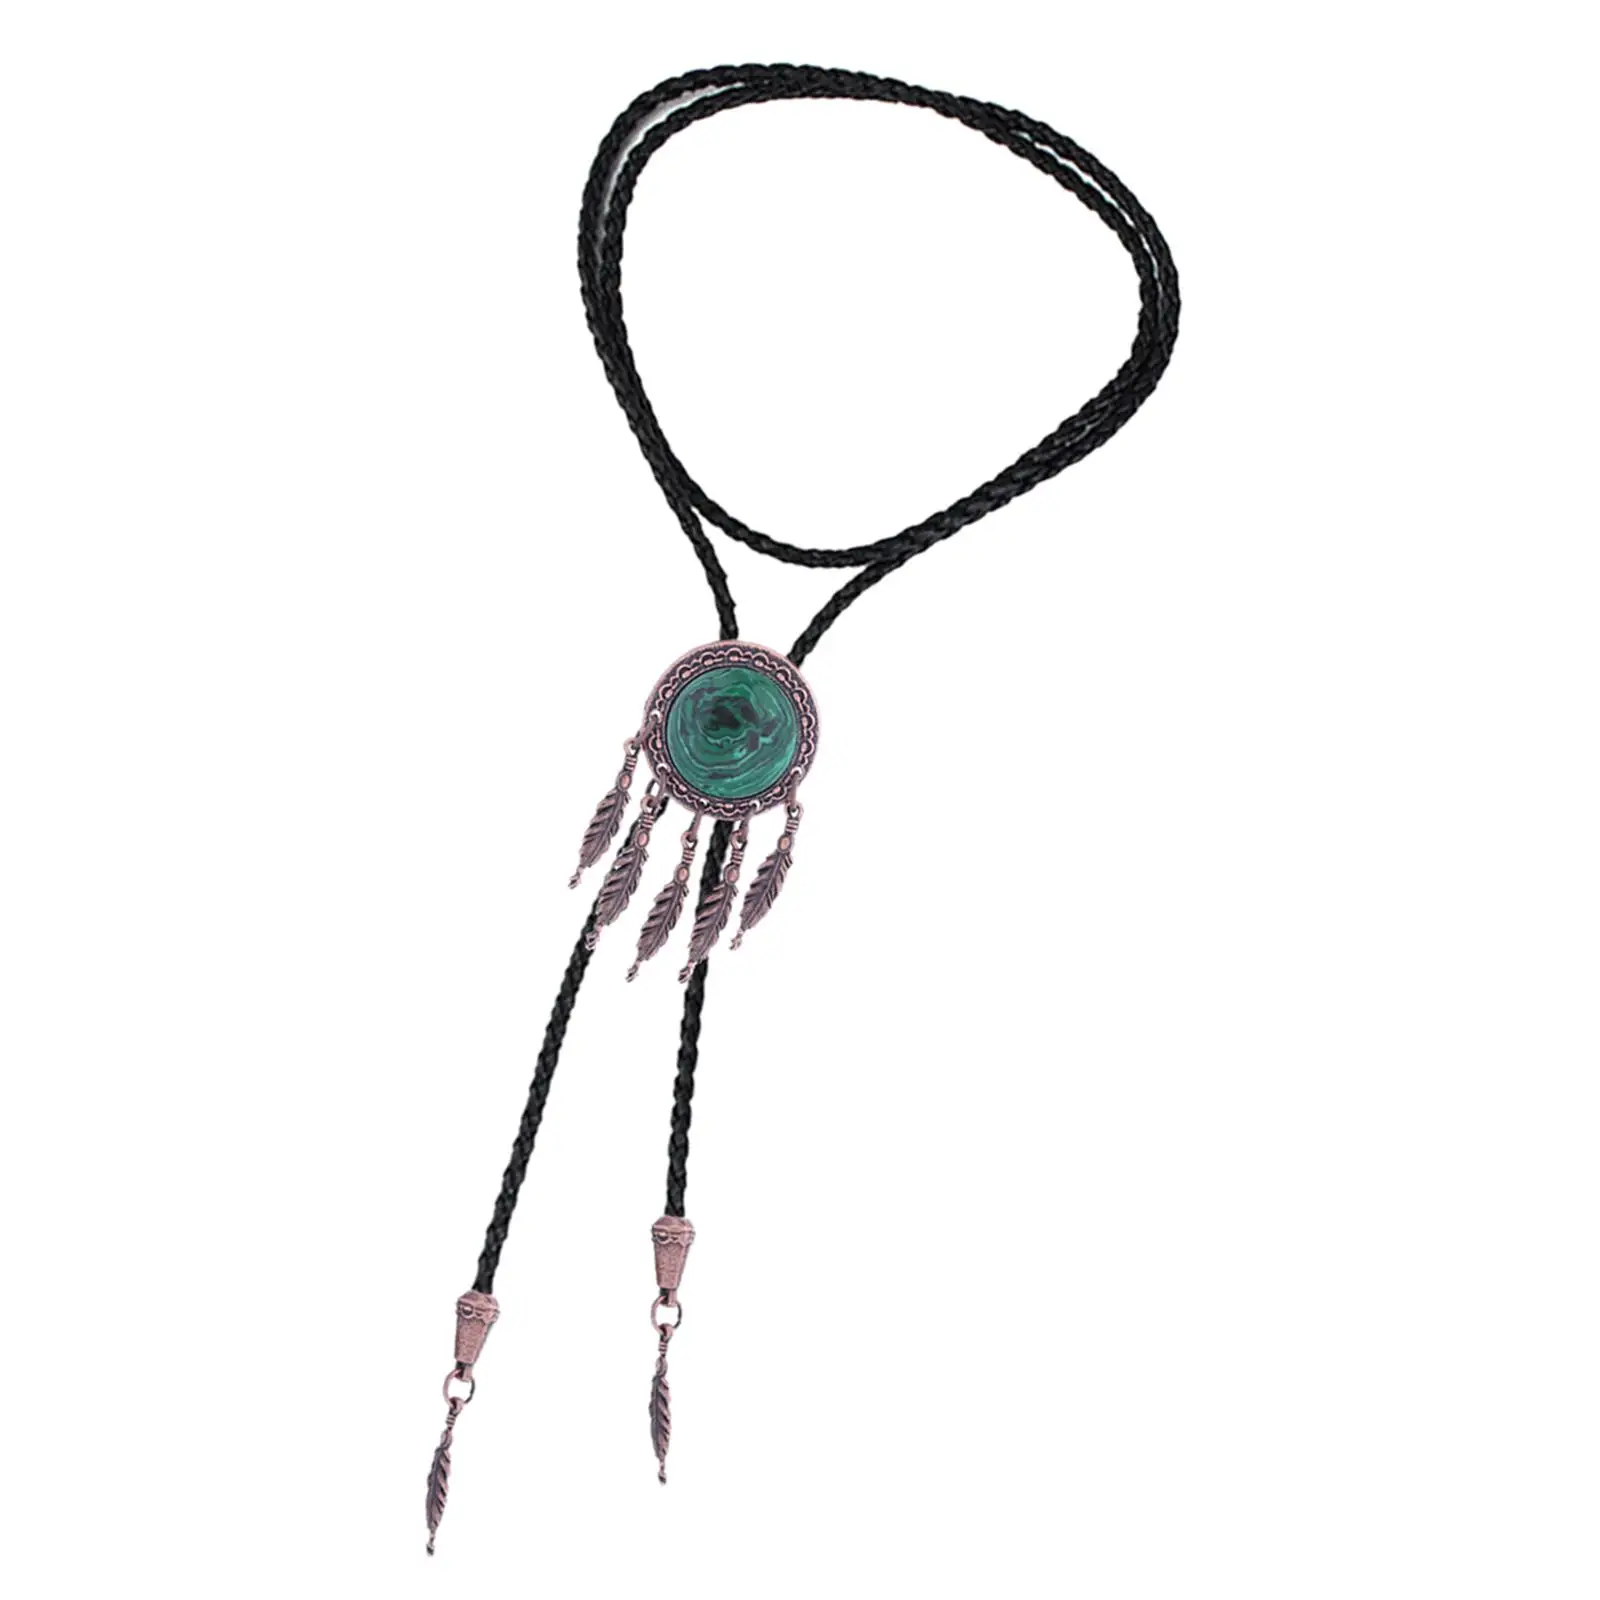 Retro Bolo Tie Green Pendant Necktie PU Leather Men Women Gift Adjustable Costume Shirt Chain Necklace Tie for Party Birthday